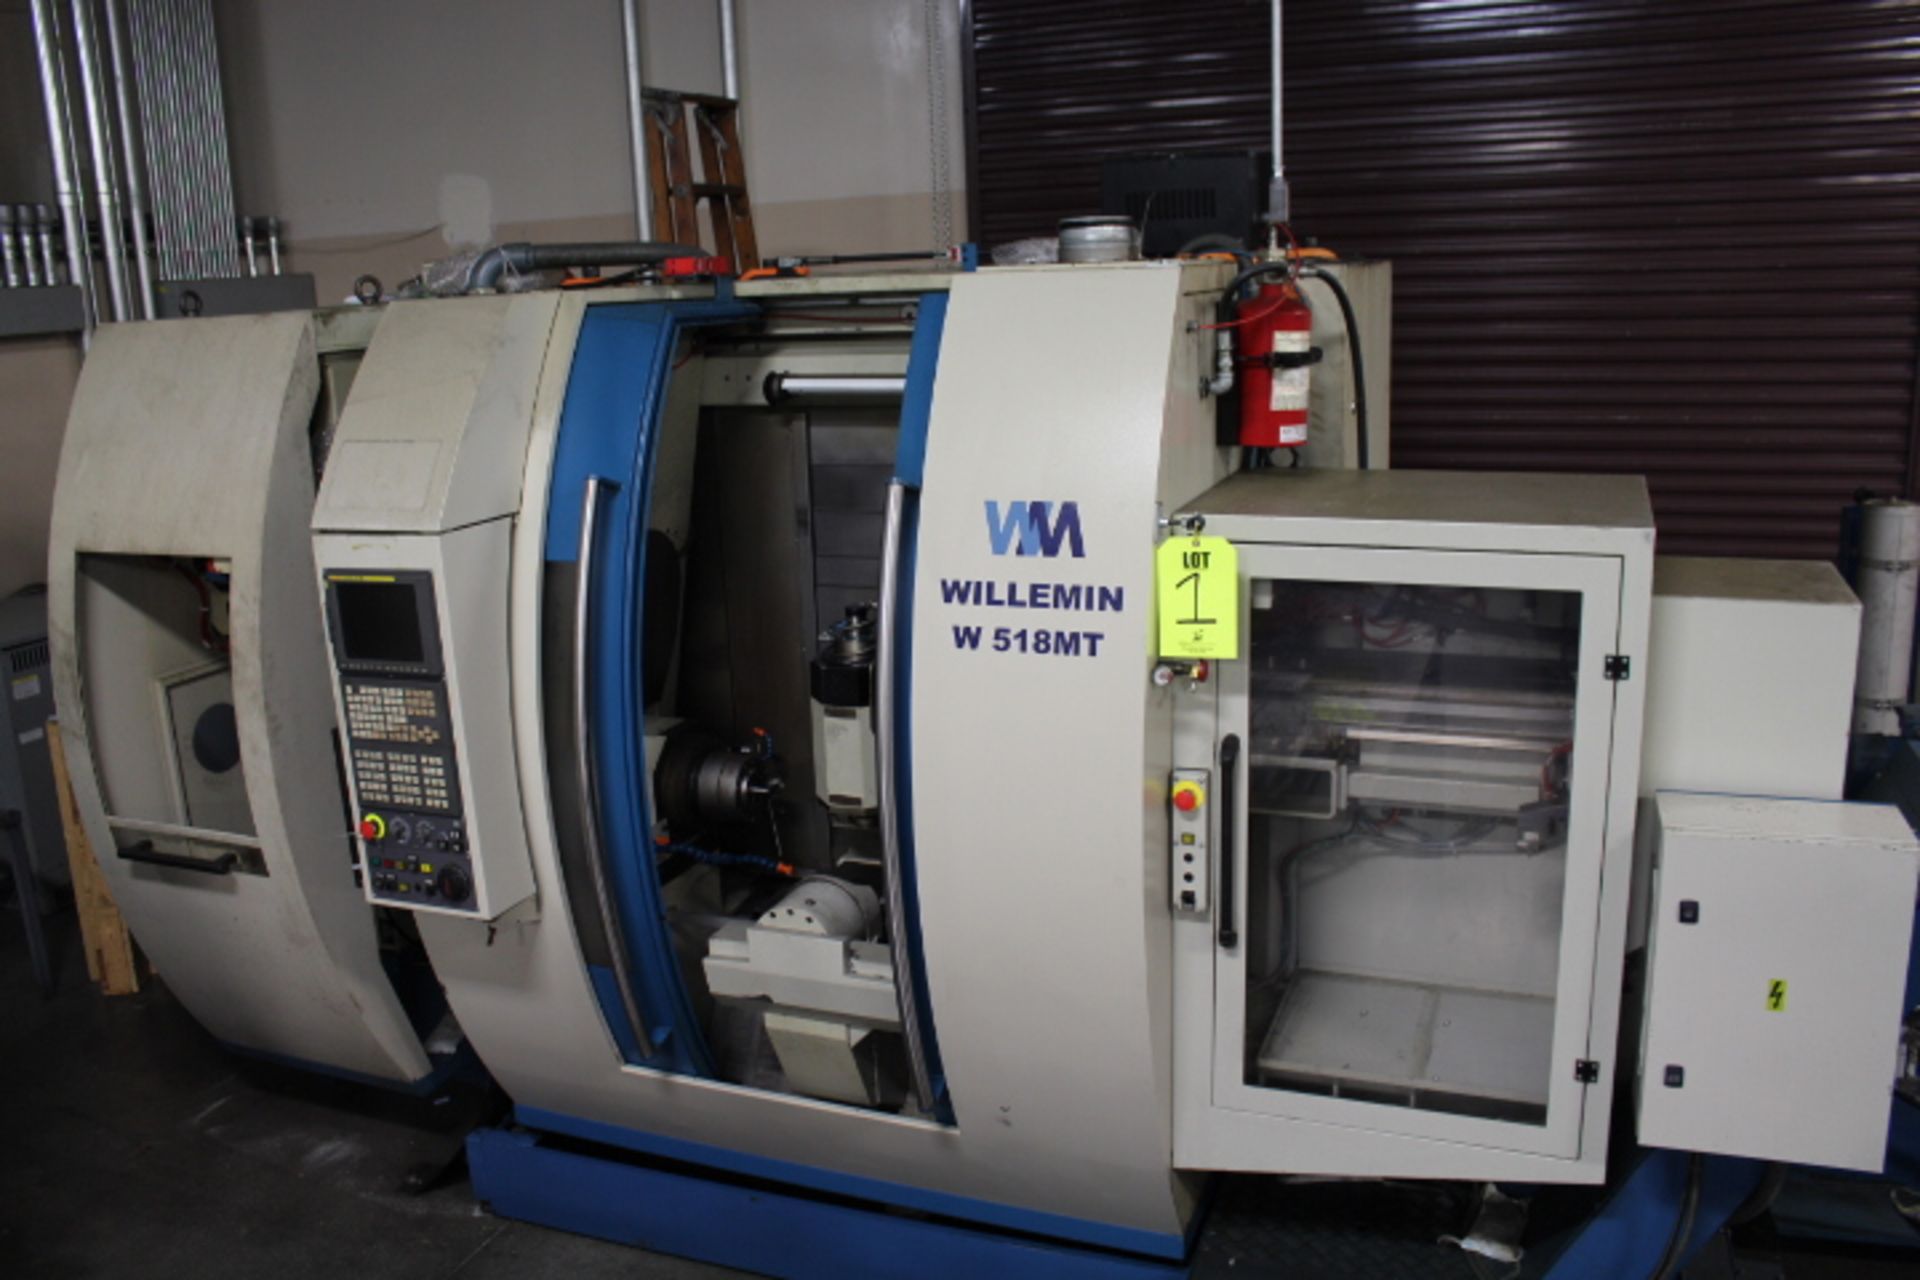 2007 WILLEMIN CNC MILL/TURNING LATHE, MODEL 518MT 7-AXIS, GE SERIES FANUC 16i-MB CNC CONTROL, 72 ATC - Image 3 of 38